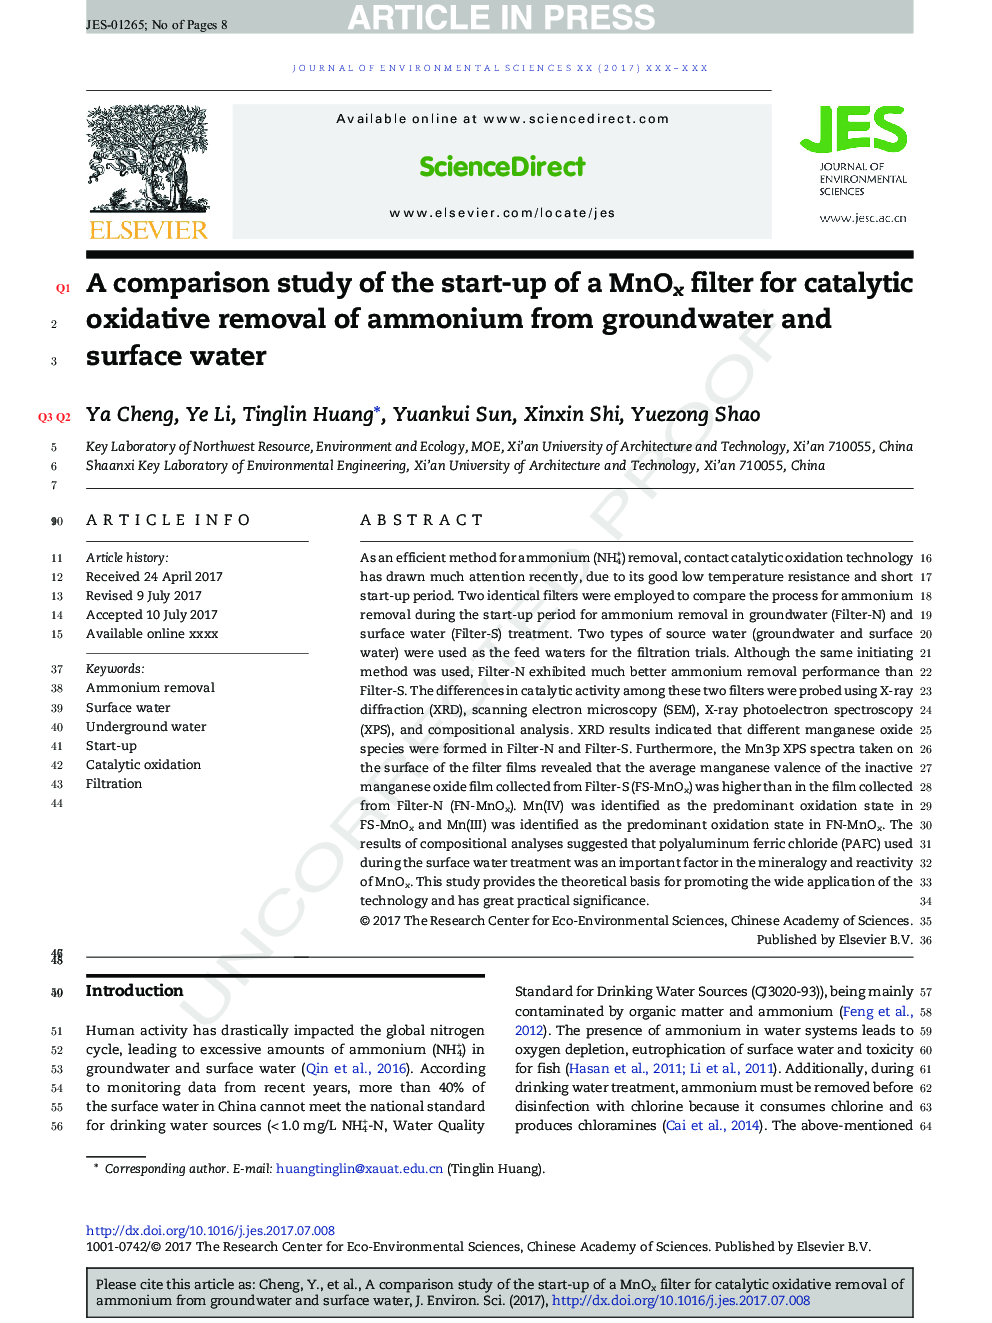 A comparison study of the start-up of a MnOx filter for catalytic oxidative removal of ammonium from groundwater and surface water